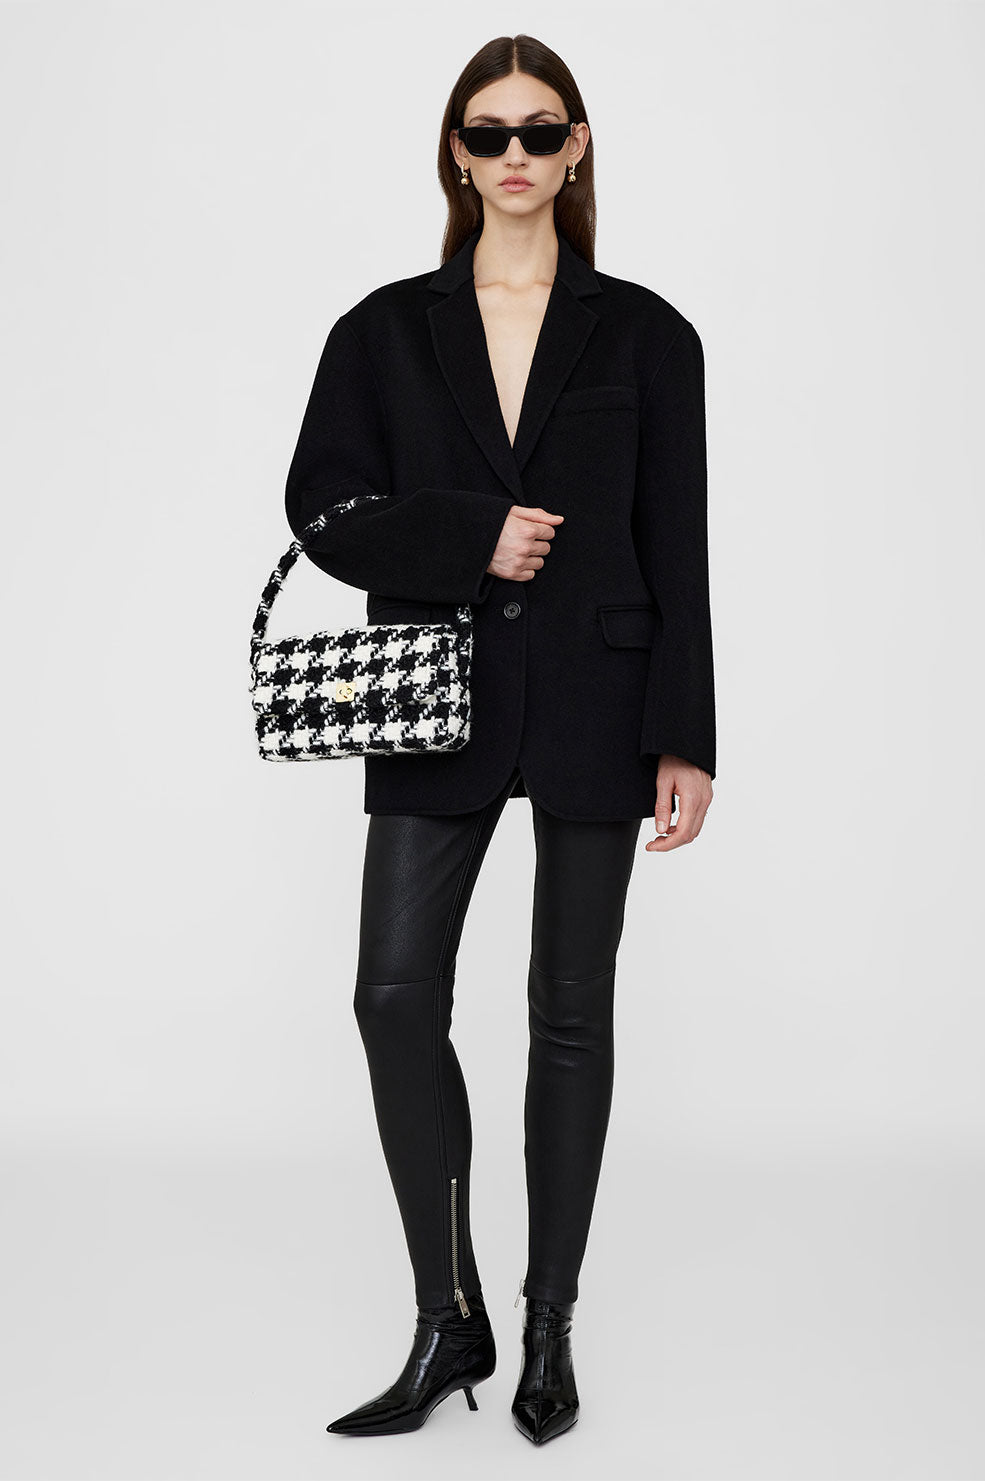 ANINE BING Nico Bag - Black And White Houndstooth - On Model View